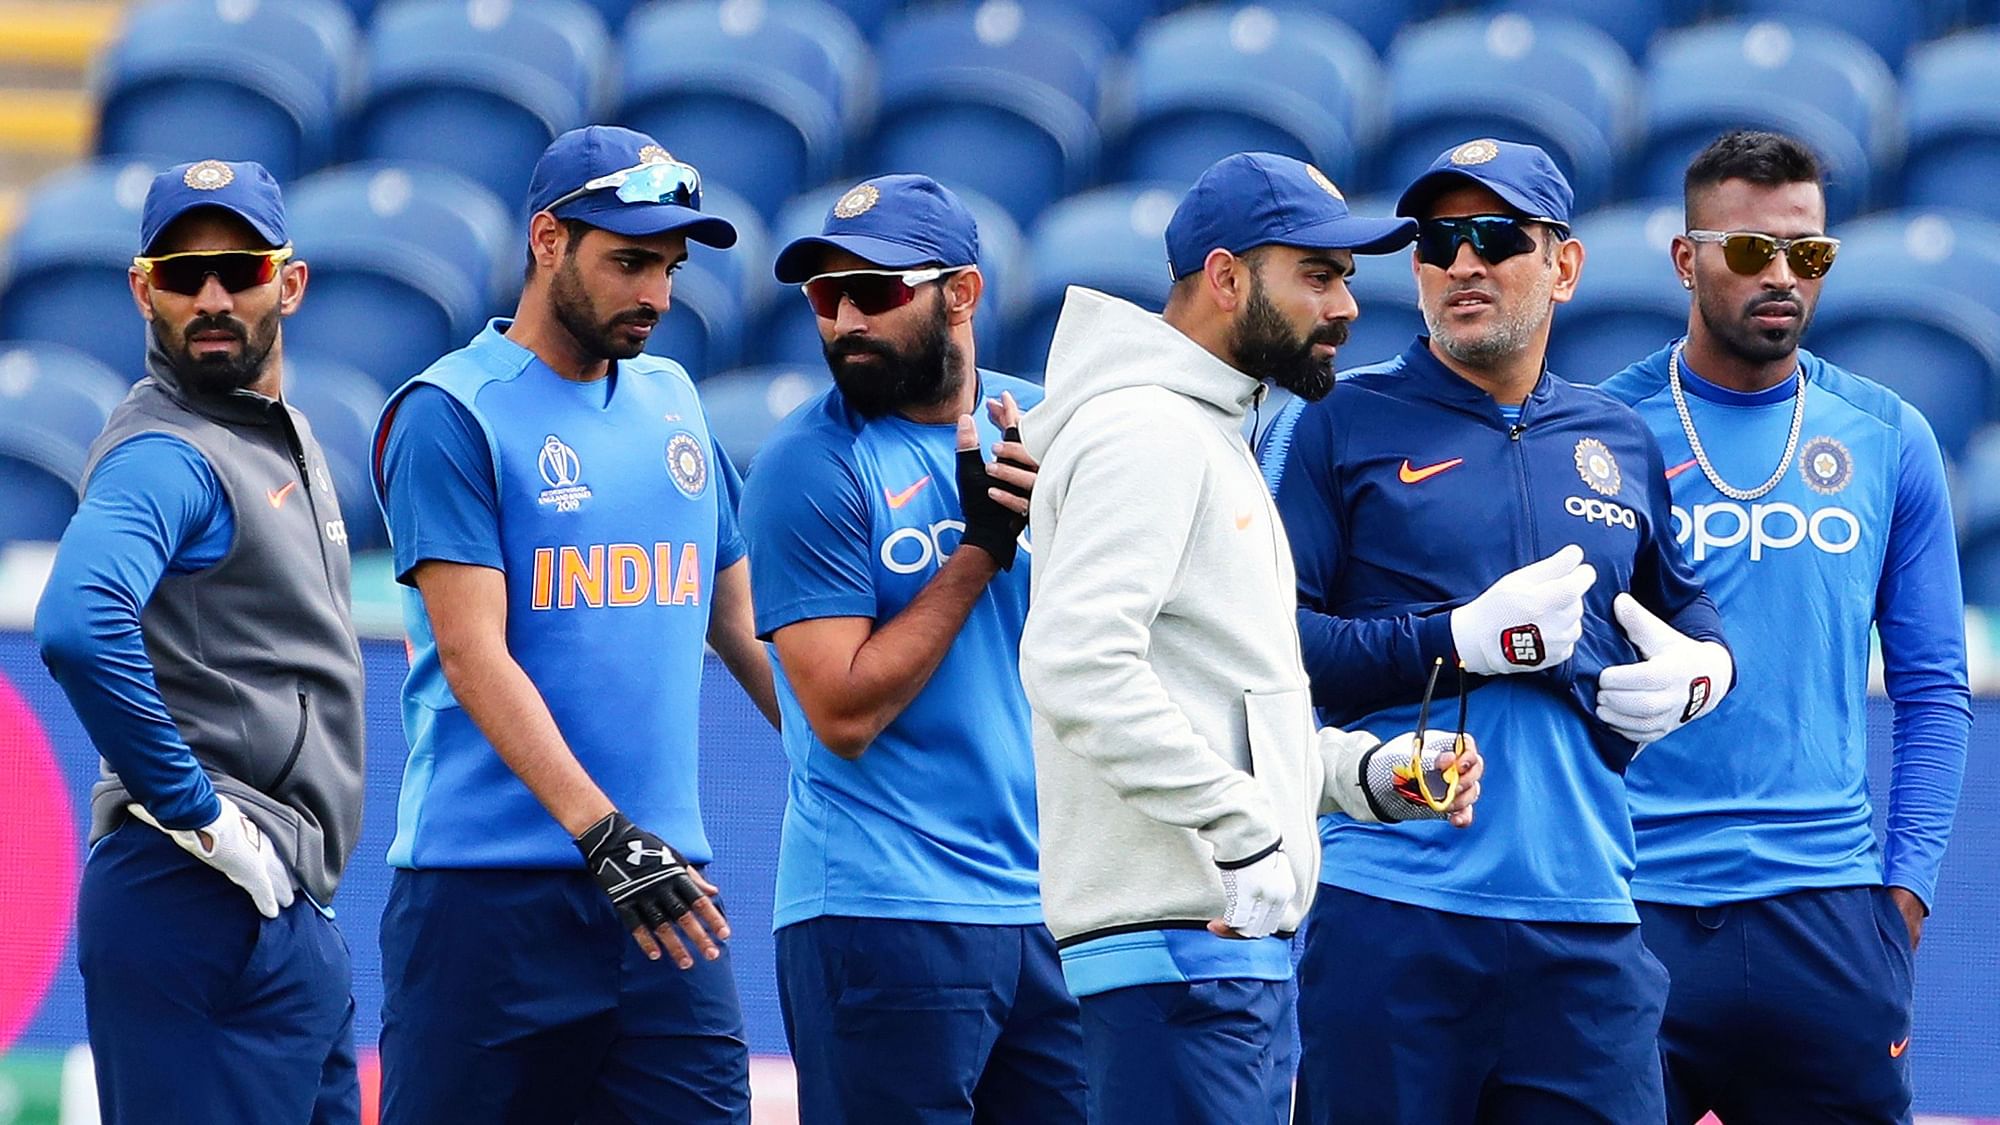 IND vs SA World Cup 2019: Team India eventually open their campaign in the global event on Wednesday, 5 June when they play South Africa in Southampton. 